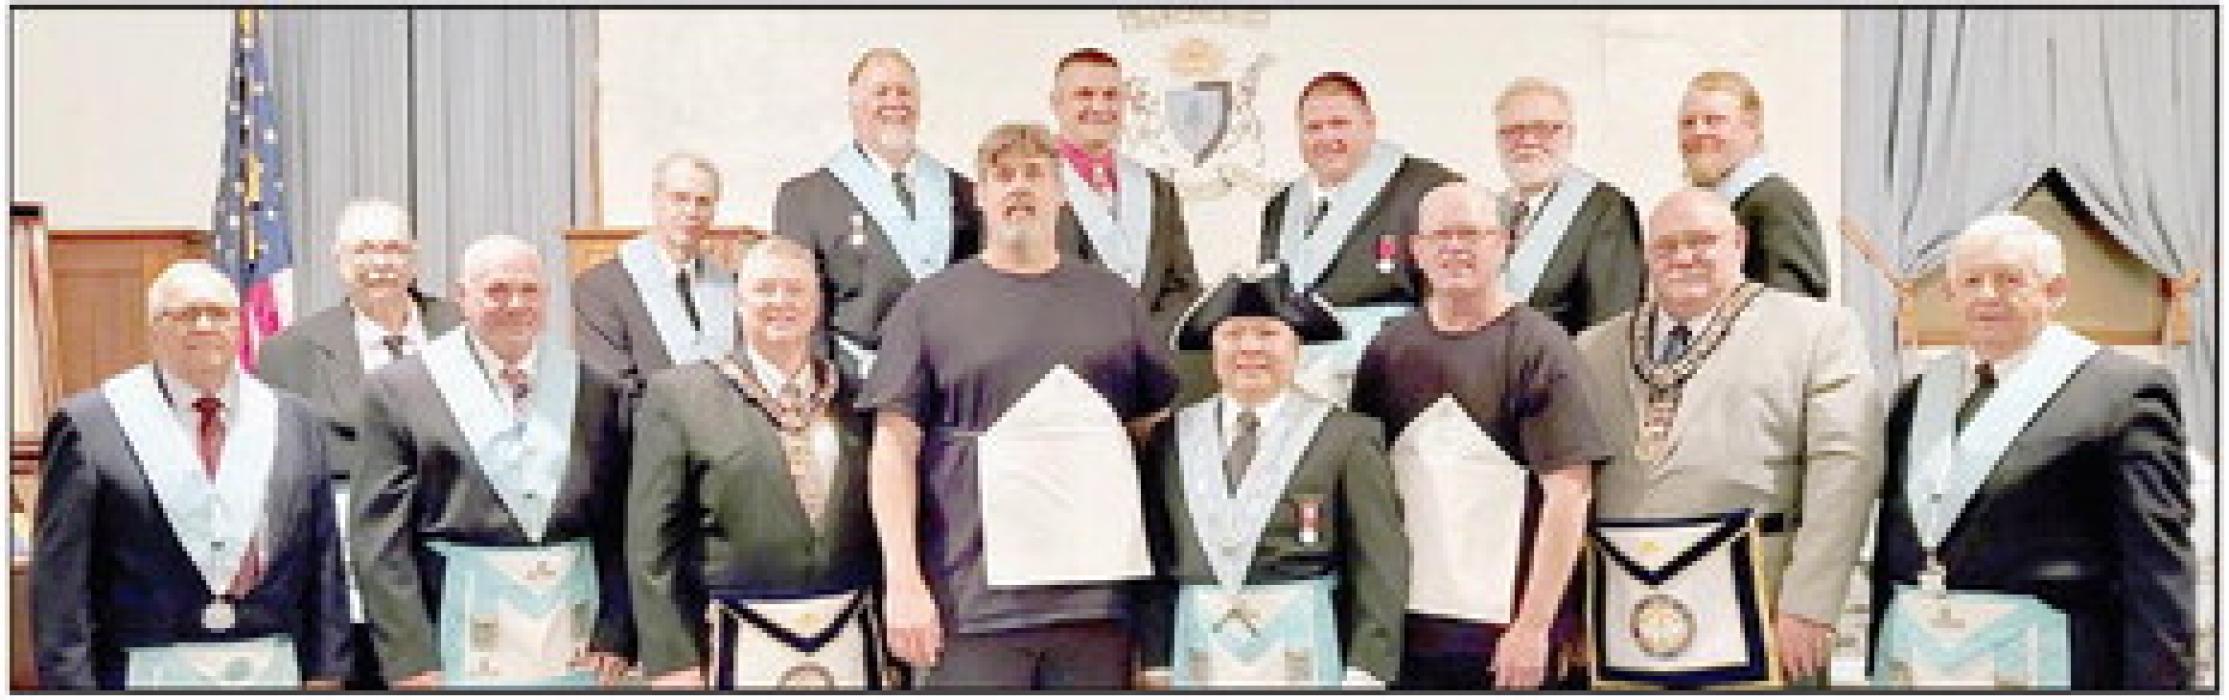 Eric Johnson and Monte Andrews were Initiated as Entered Apprentice Masons on July 25, 2023 at Long Pine Masonic Lodge. Those in attendance were: (Front Row - Left to Right): James Nelson, Stan Weidner, Joe McBride, Eric Johnson, Alvin Benemerito, Monte Andrews, Bob Moninger and Terry Foxworthy; (Back Row - Left to Right): Dale Mellor, Phil Brown, Barry Frerichs, Garrett Weidner, Jeremiah Schartz, Don Coash and Cody Croghan.